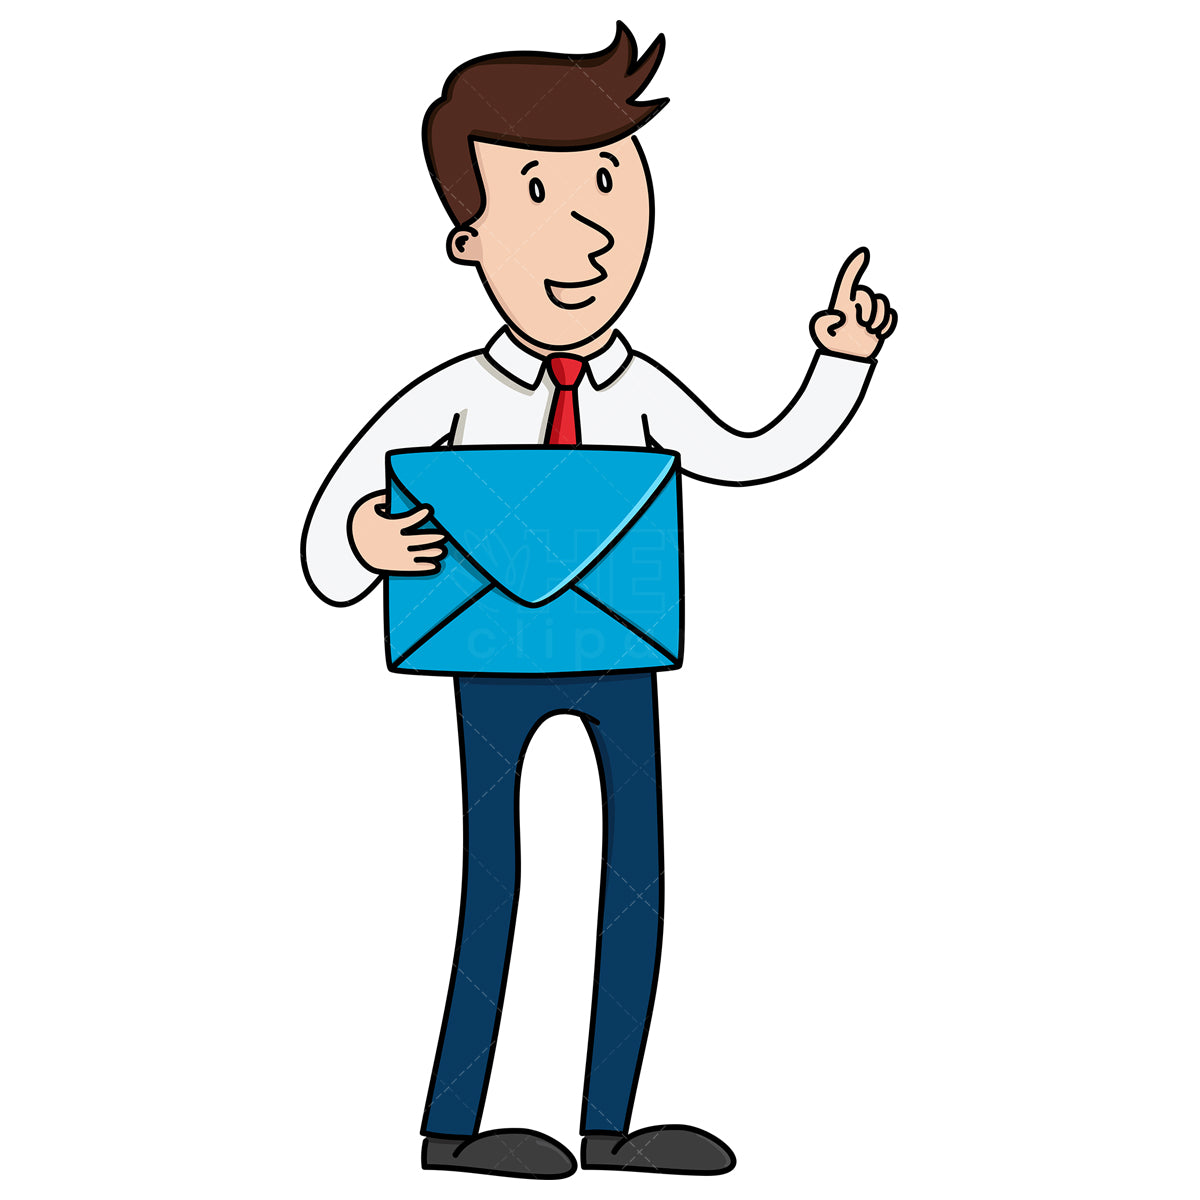 Royalty-free stock vector illustration of a businessman holding envelope and making point.